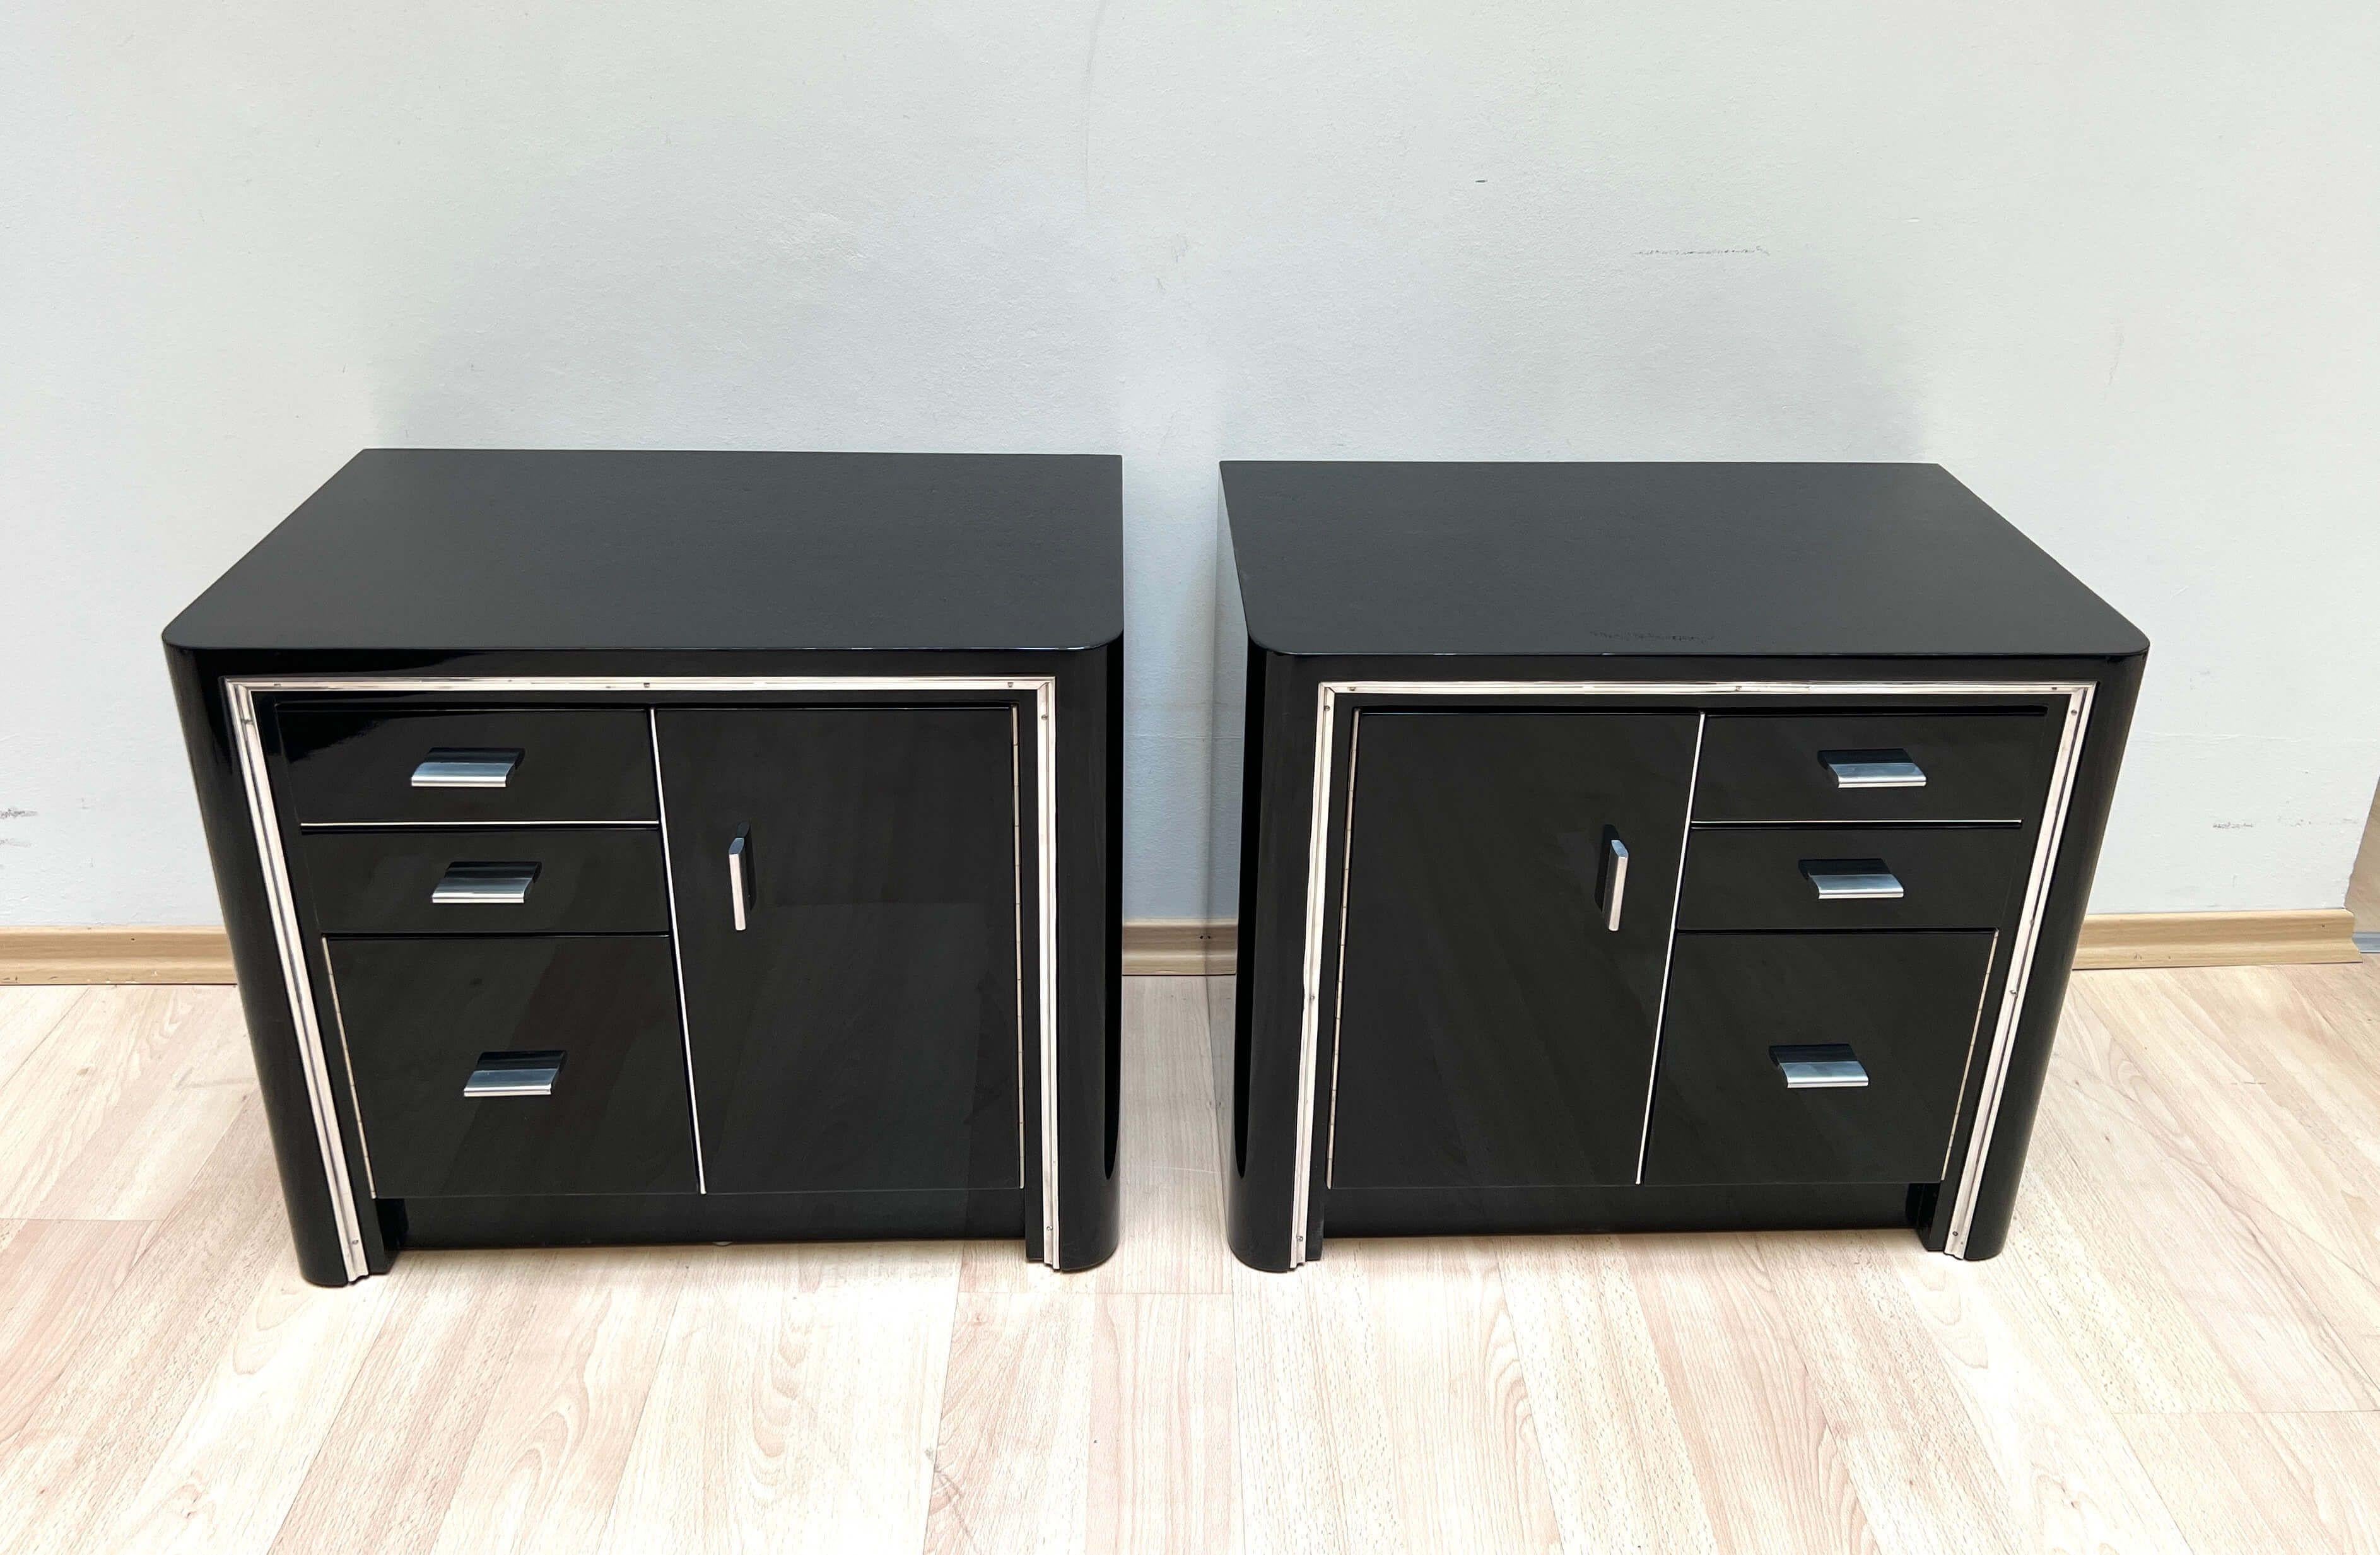 French Art Deco Nightstands, Black lacquer and Metal, France circa 1940